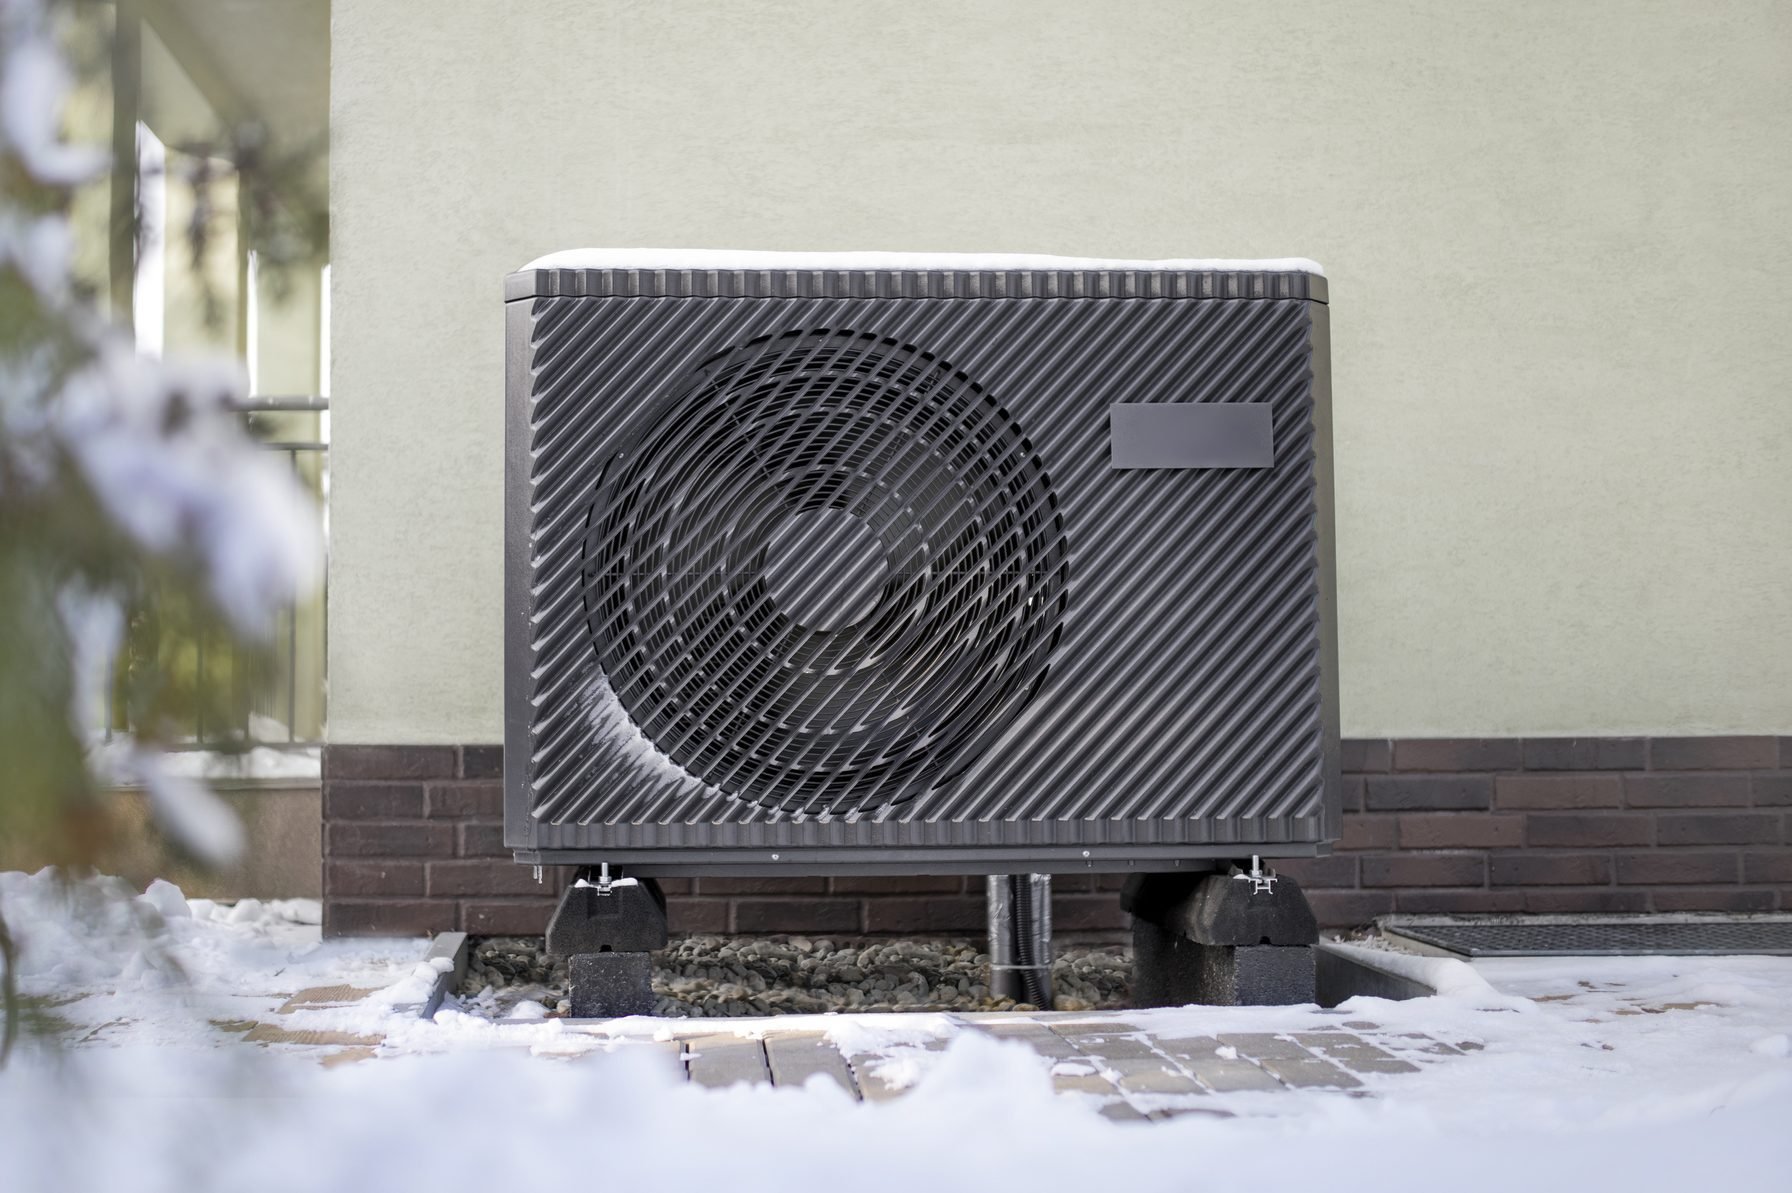 Air source heat pump in winter conditions